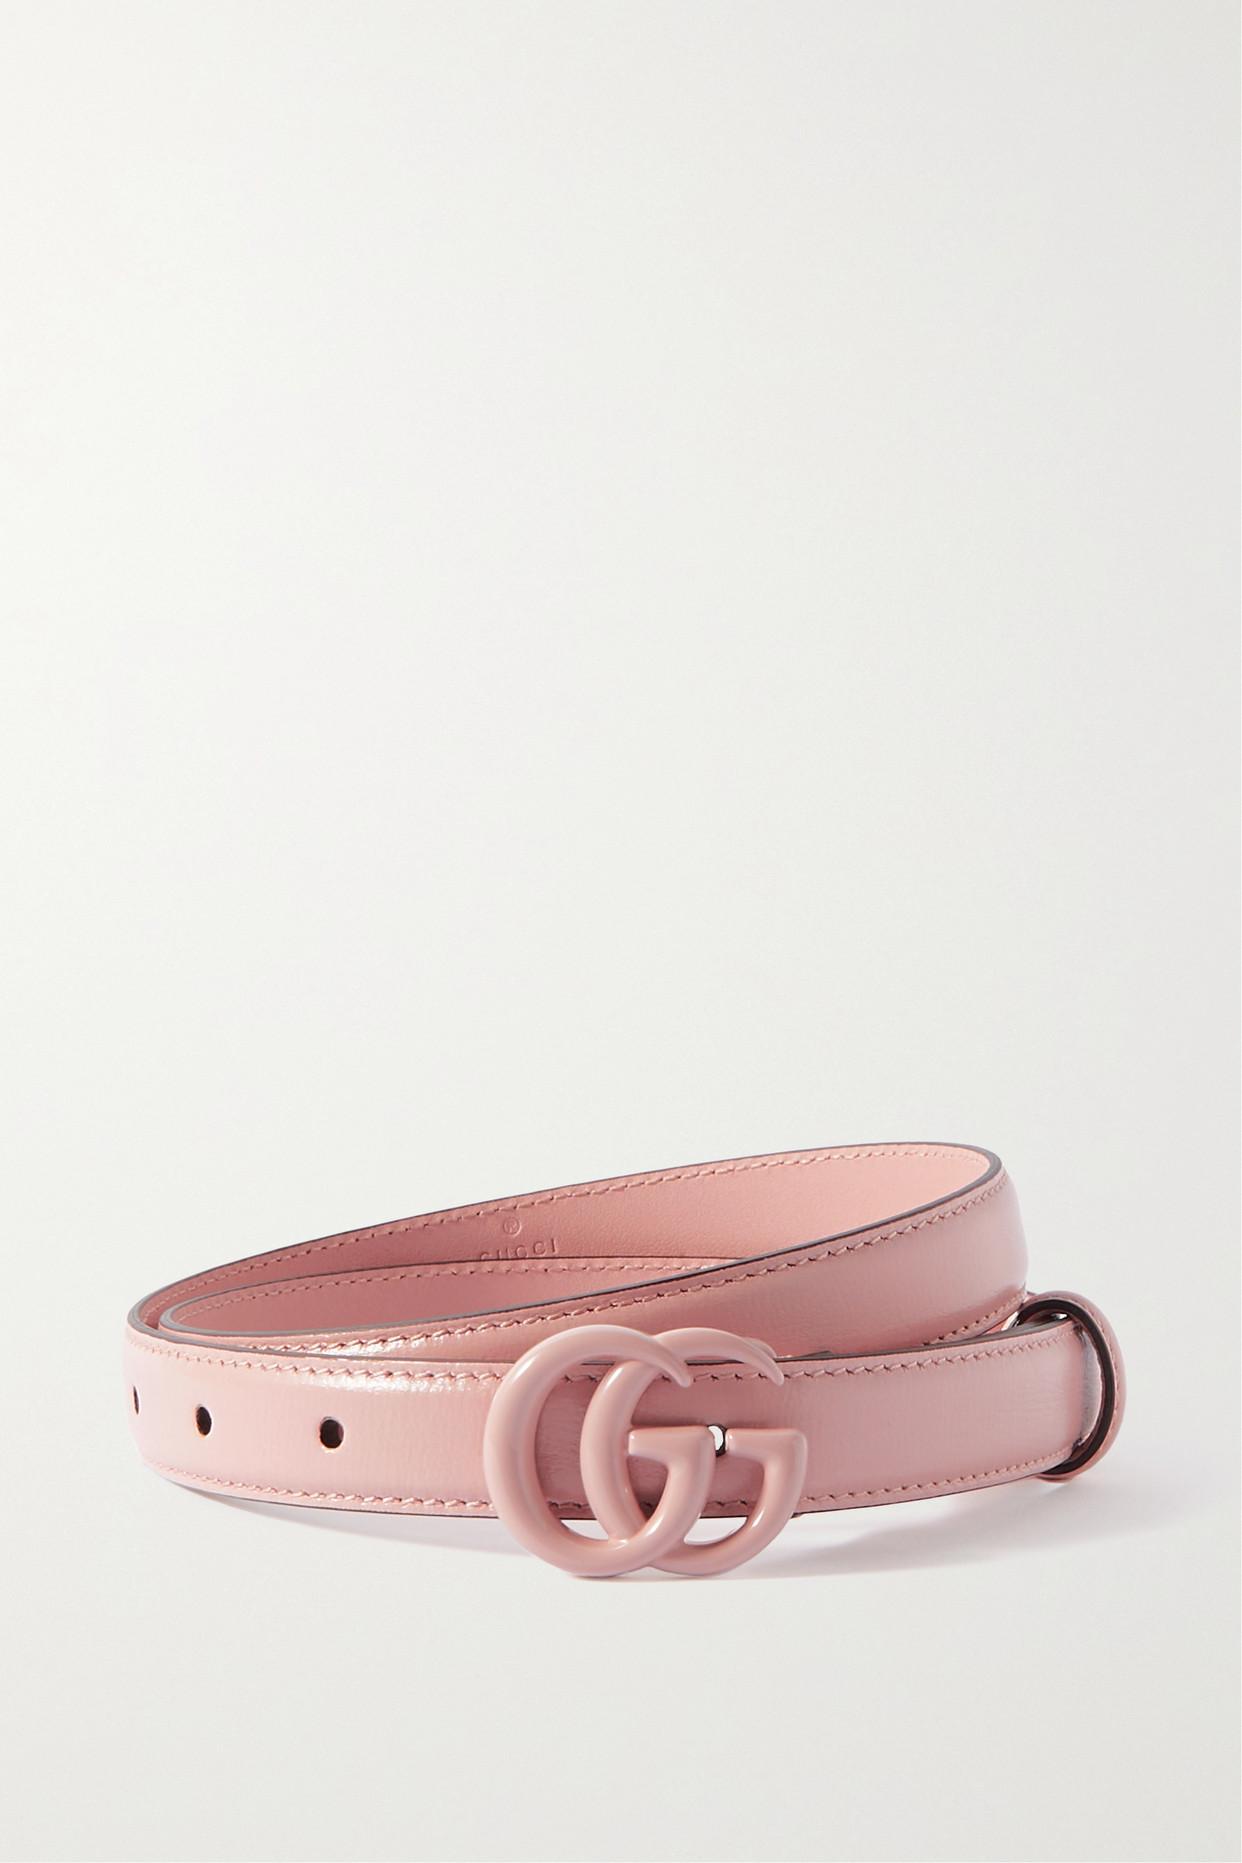 Gucci Gg Marmont Leather Belt in Pink | Lyst